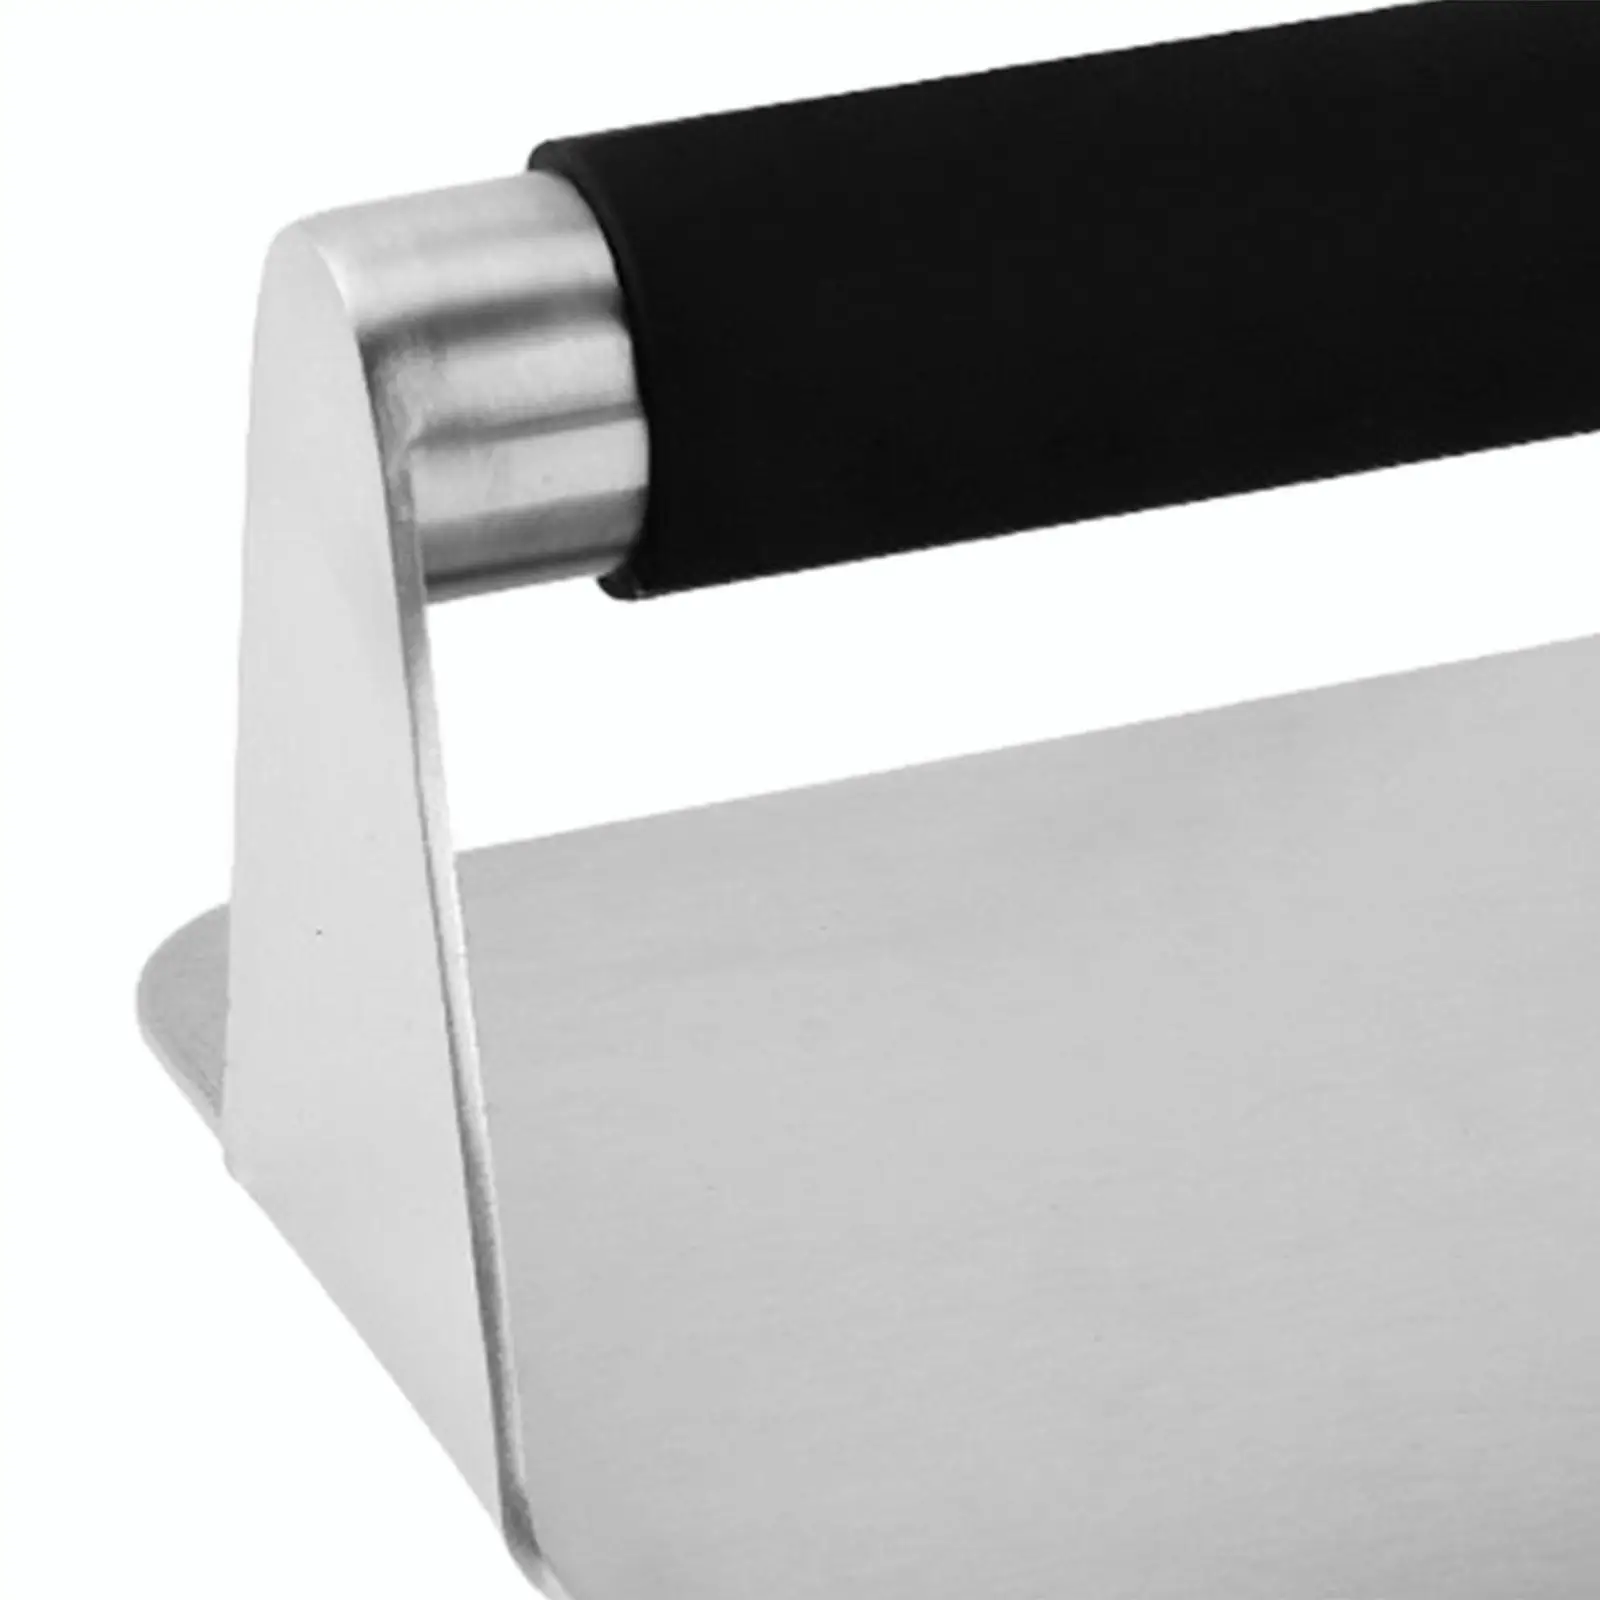 Stainless Steel Burger Press Manual Kitchen Accessories Smooth Grill Press Burger Smasher for Sandwich Grill Steaks Kitchen Home